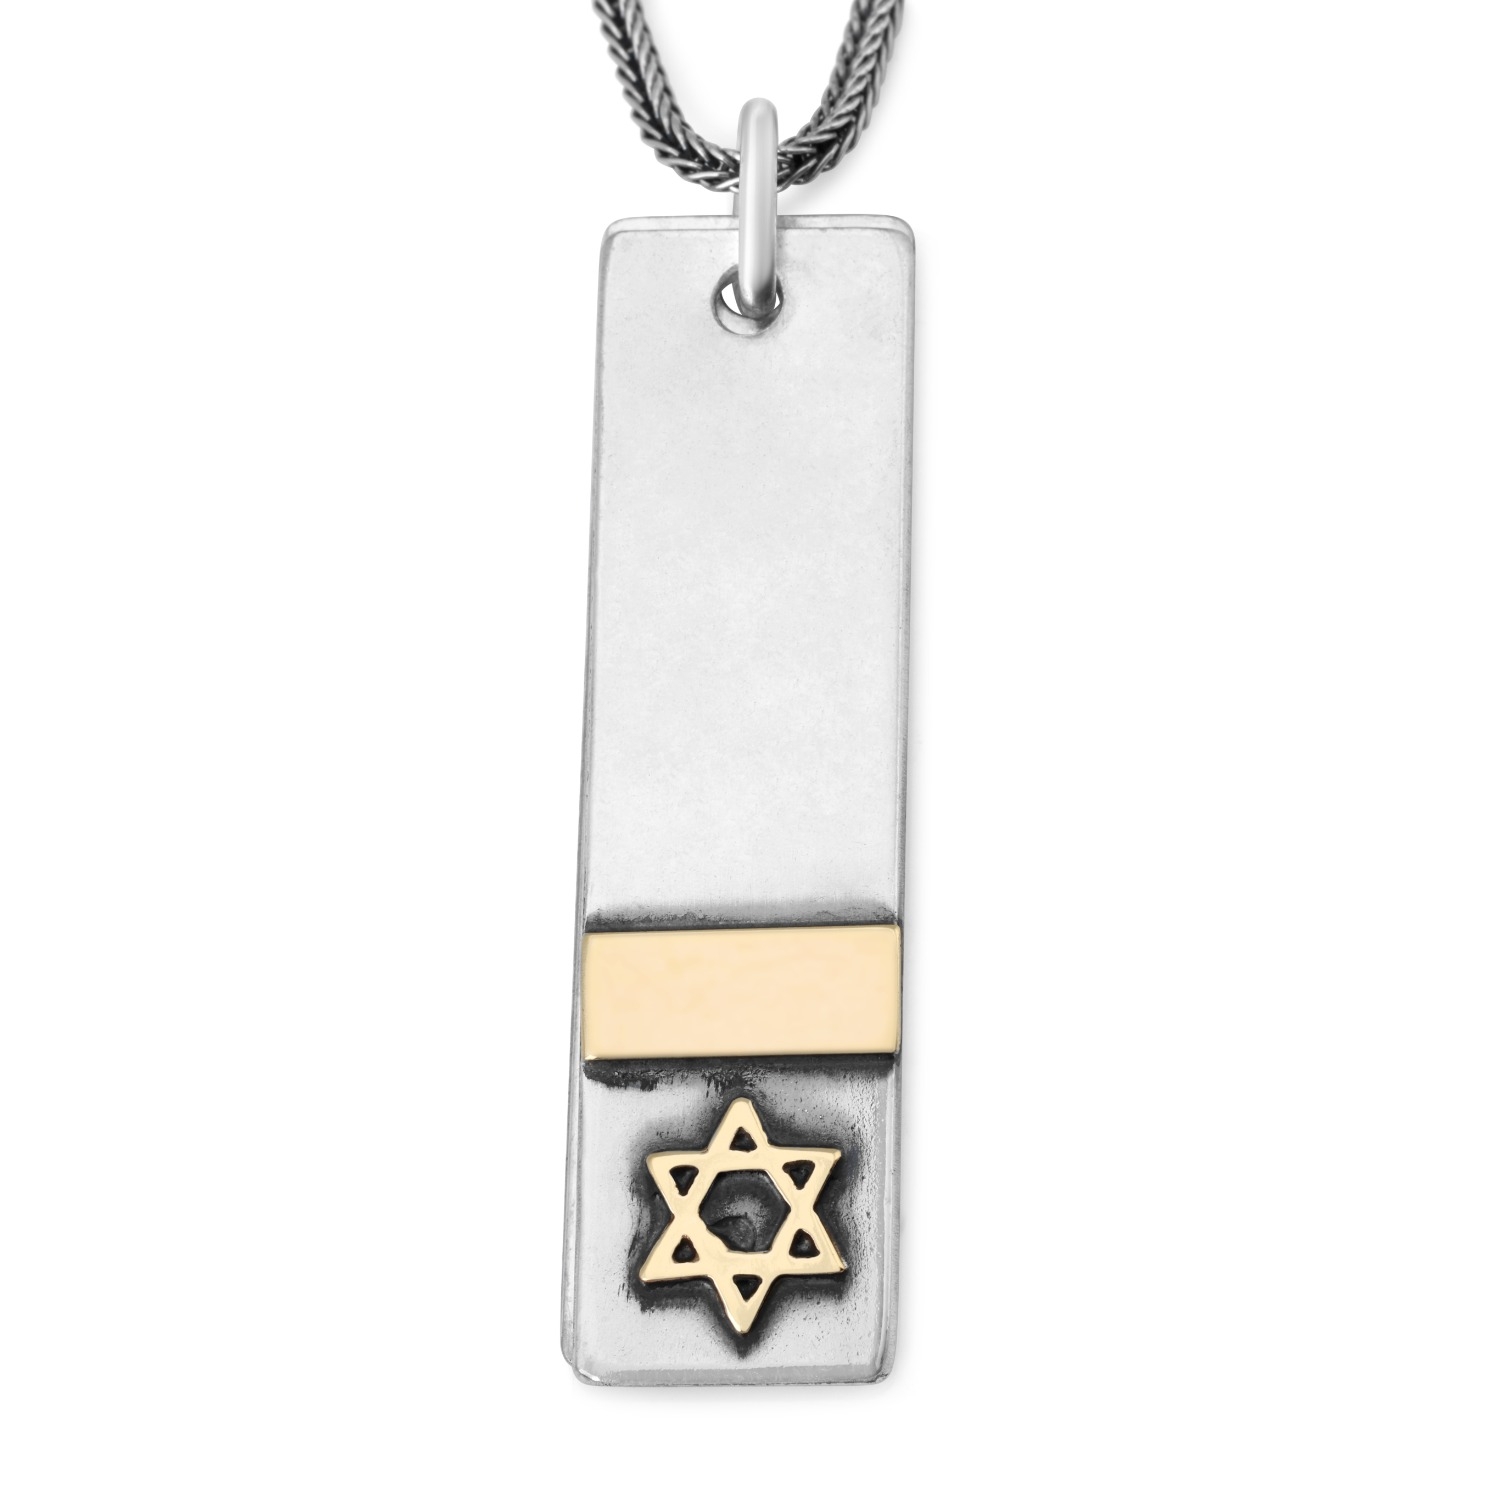 Shema Yisrael: Silver and Gold "Dog Tags" Pendant for Men - 1